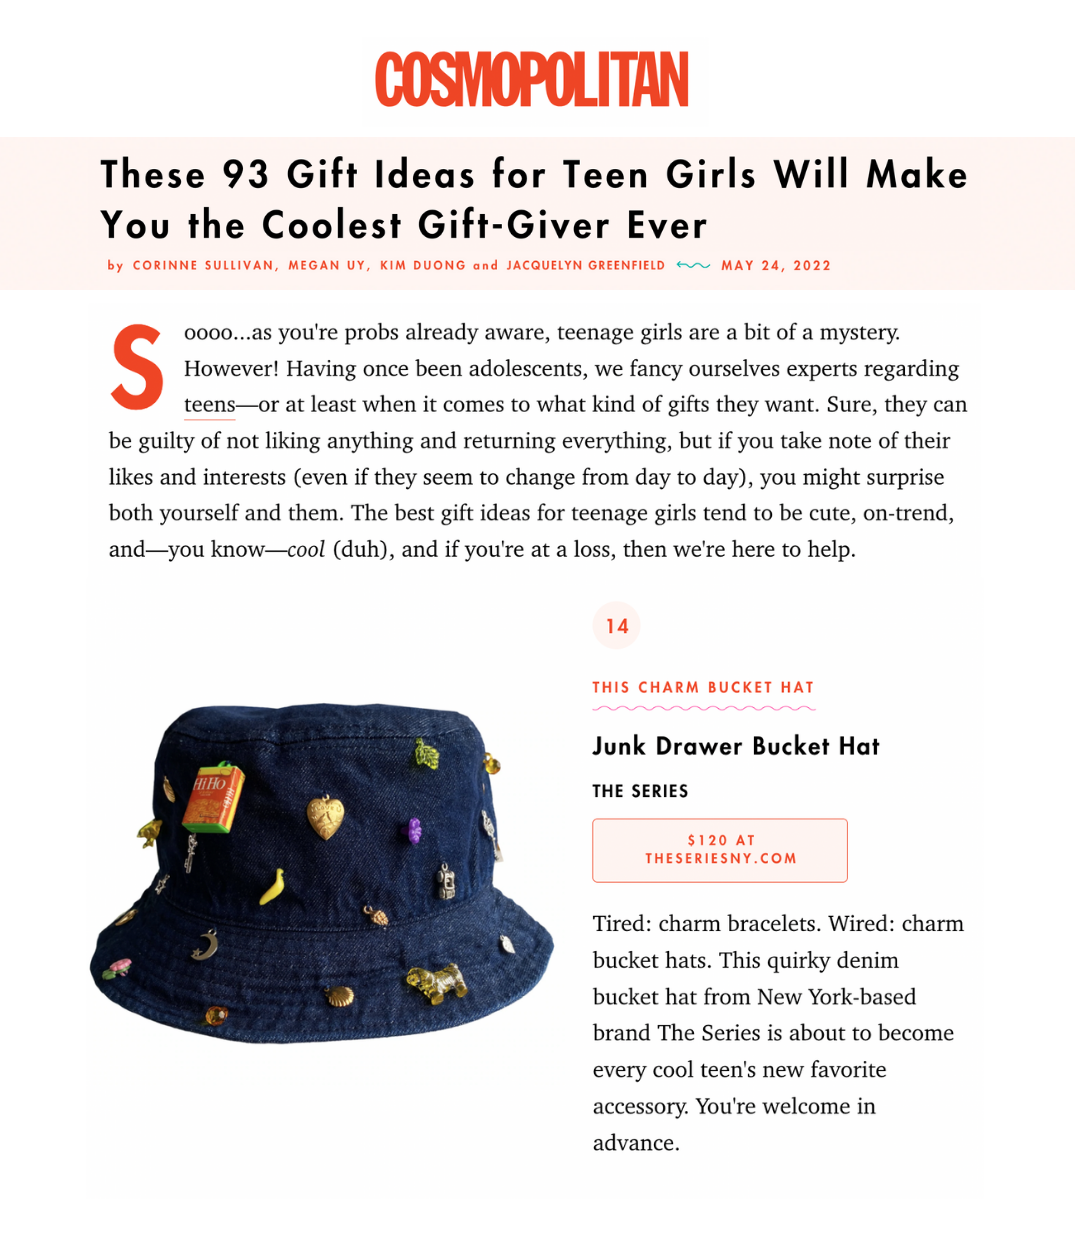 COSMOPOLITAN | These 93 Gift Ideas for Teen Girls Will Make You the Coolest Gift-Giver Ever